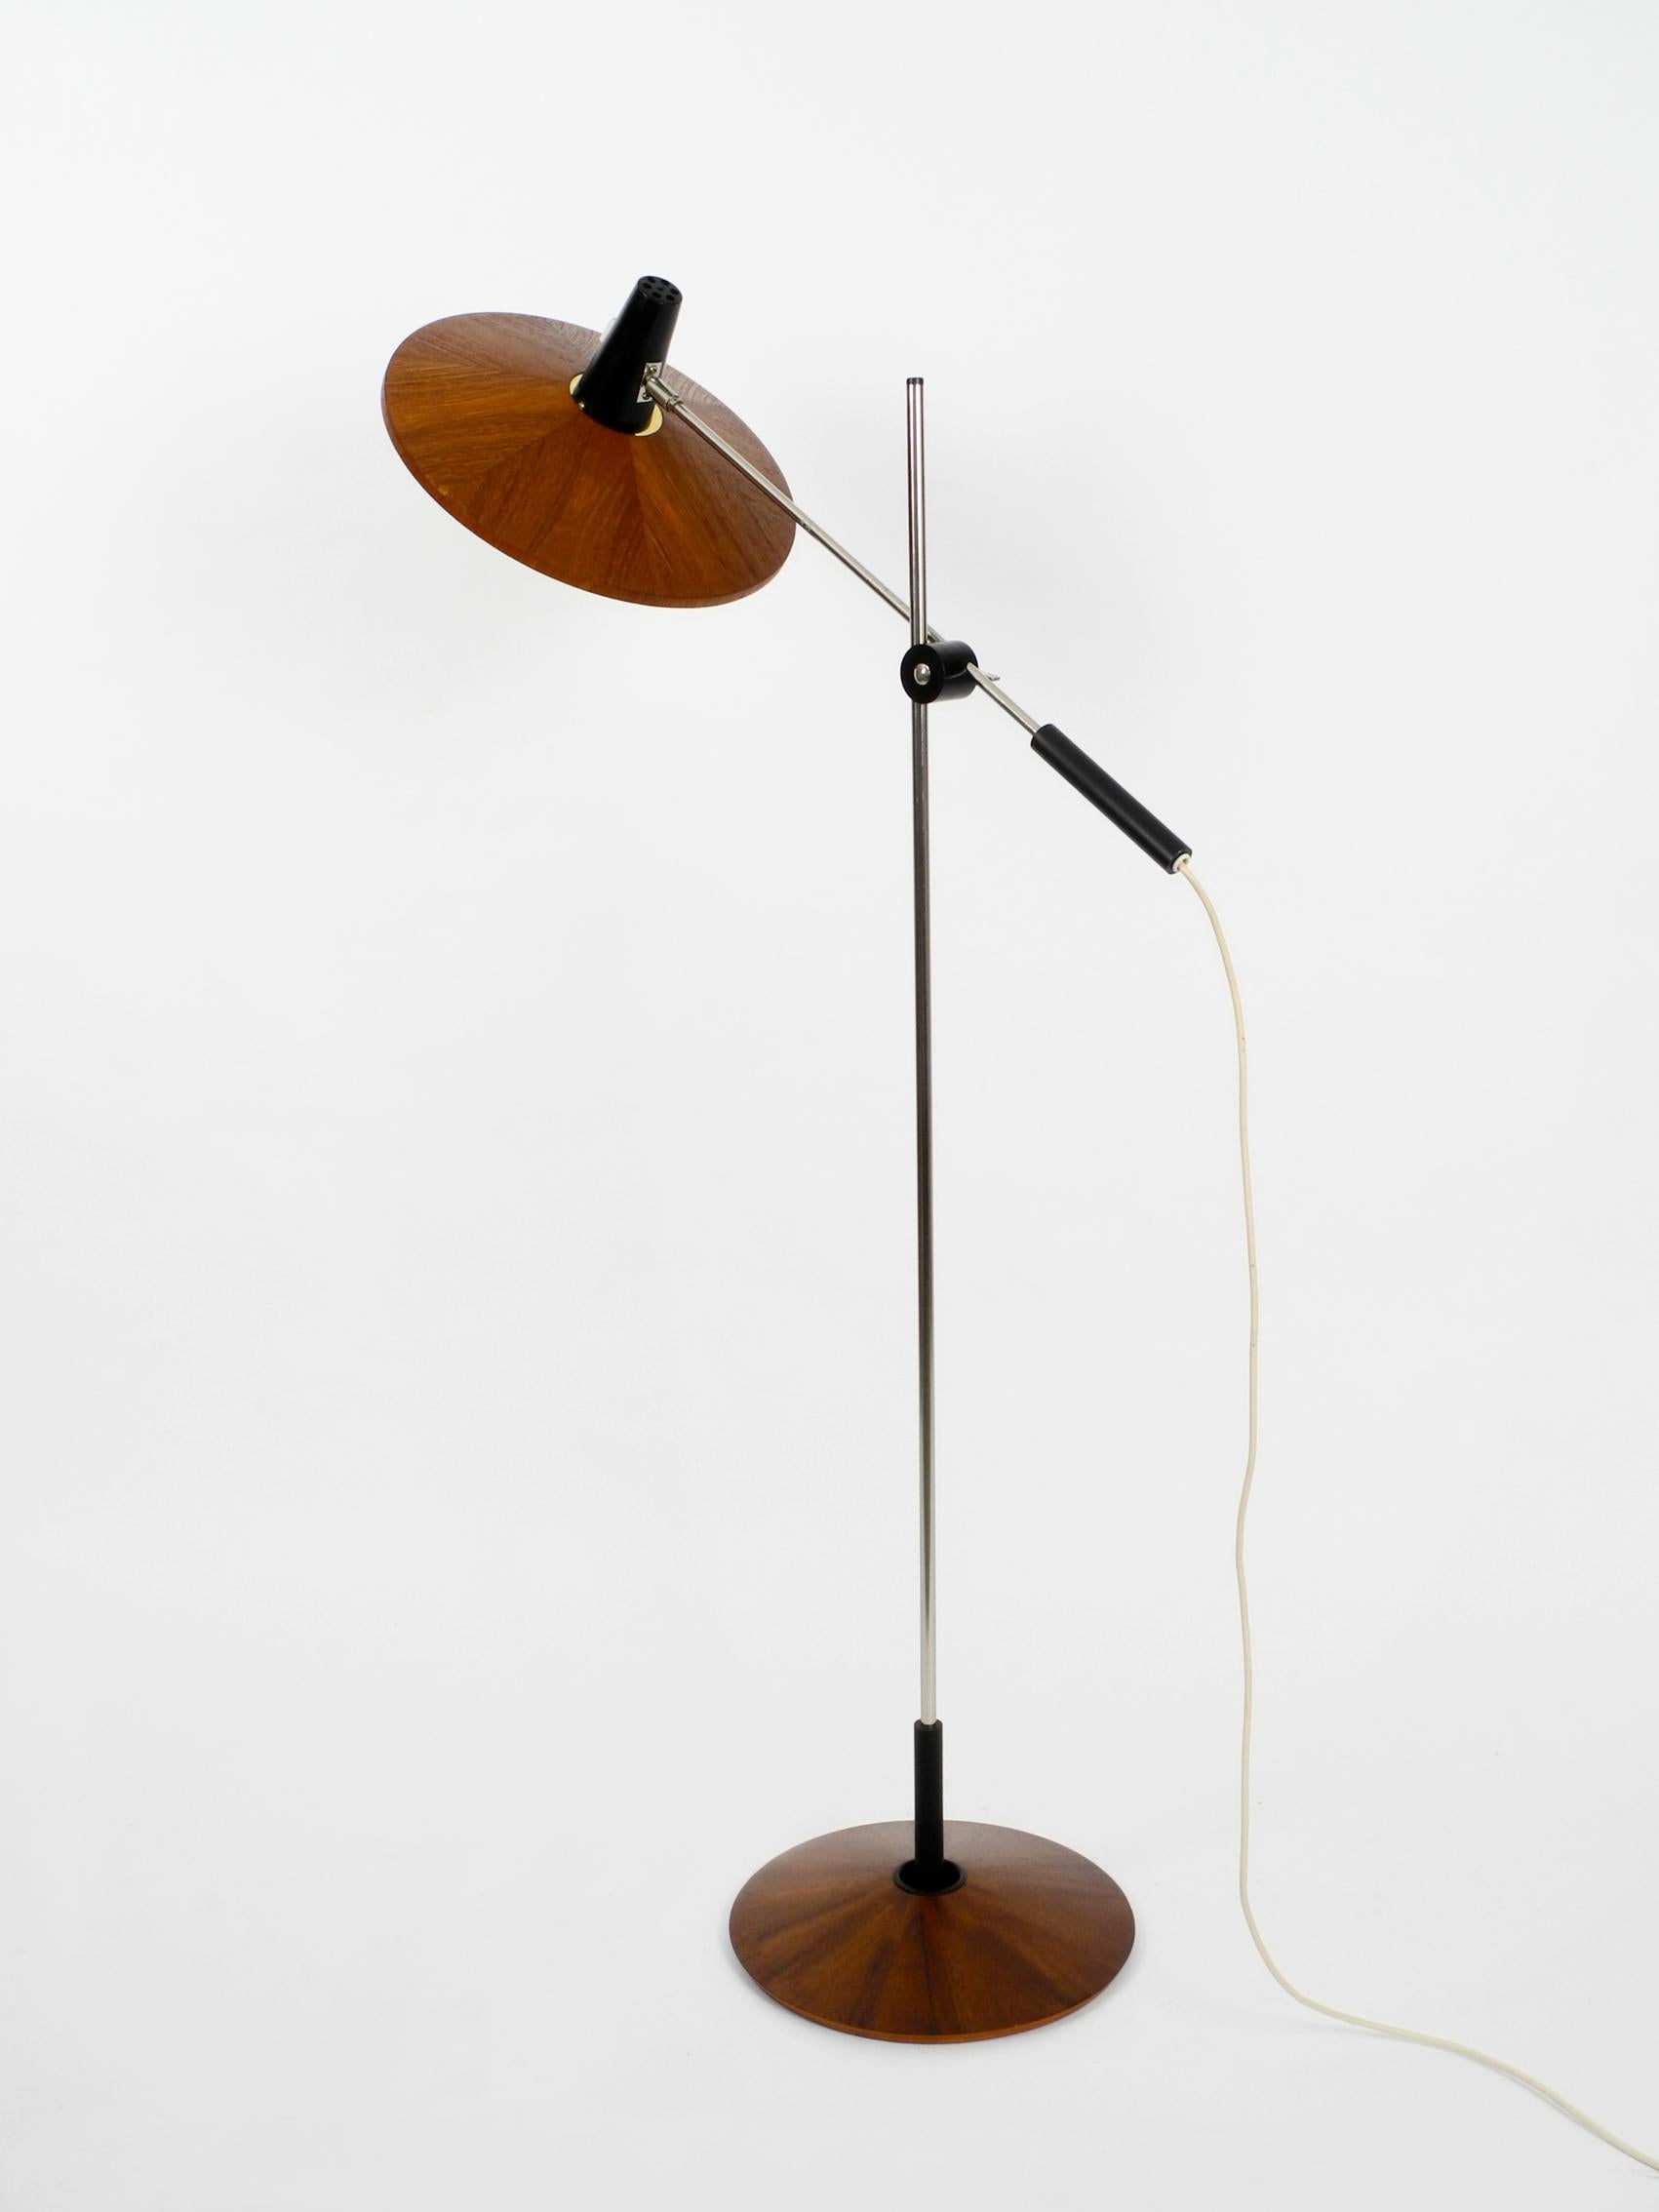 Very rare Mid-Century Modern floor lamp with teak veneer and very large lampshade.
Designed by George Frydman. Made by Temde. Made in Switzerland.
Steplessly adjustable. Very nice minimalistic 1950s design. With nice plastic diffuser for pleasant